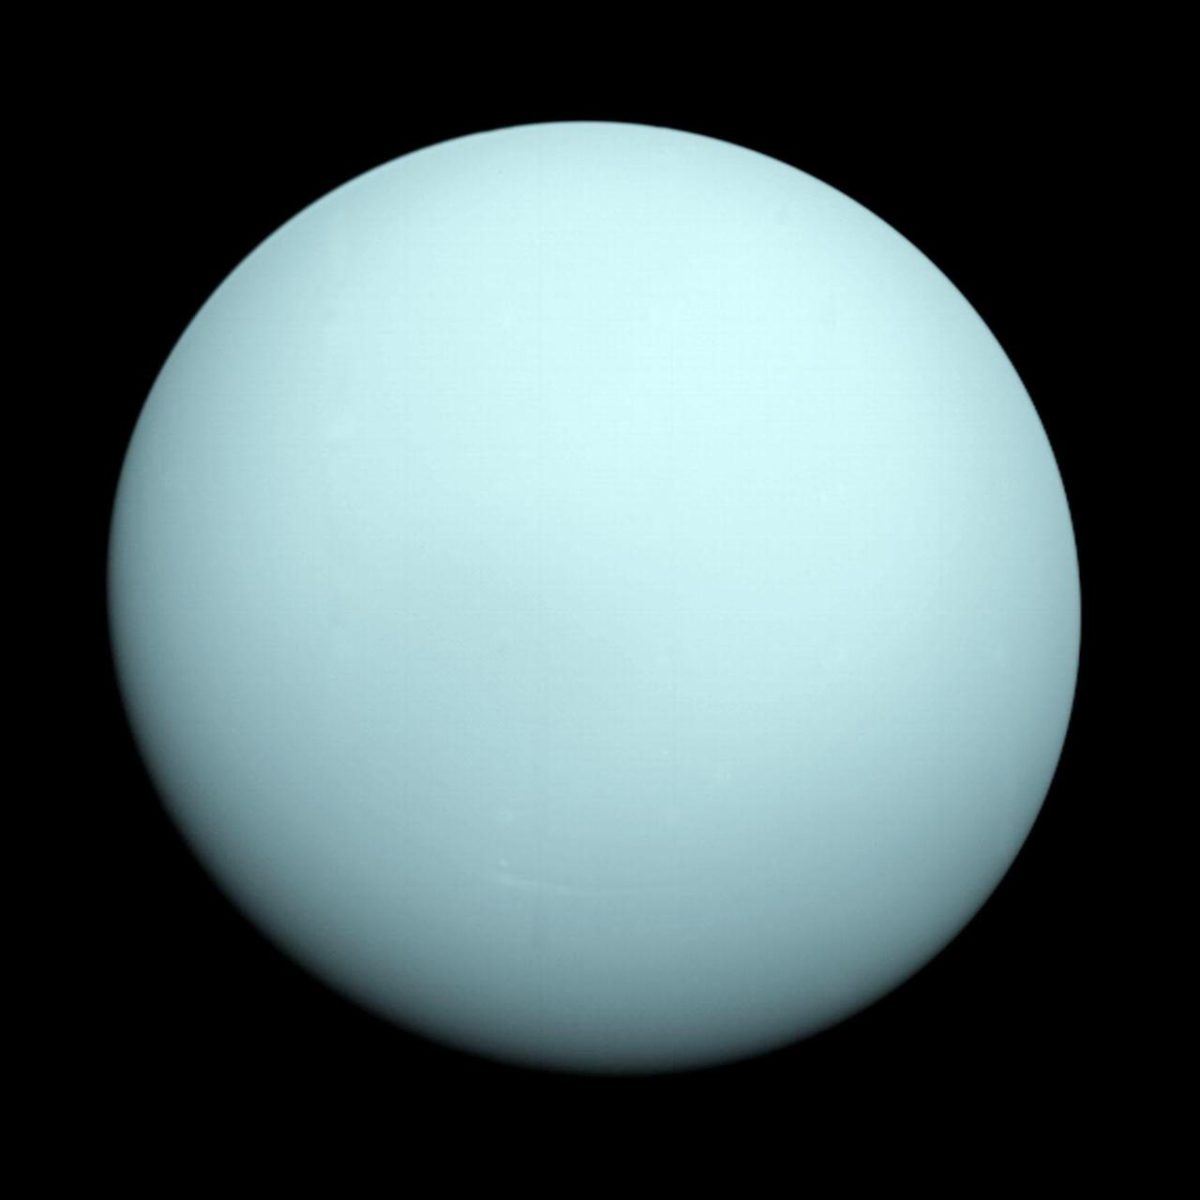 Uranus+pictured+in+1986+by+Voyager+2.+NASA%2FJPL+-+Caltech+Voyager+2